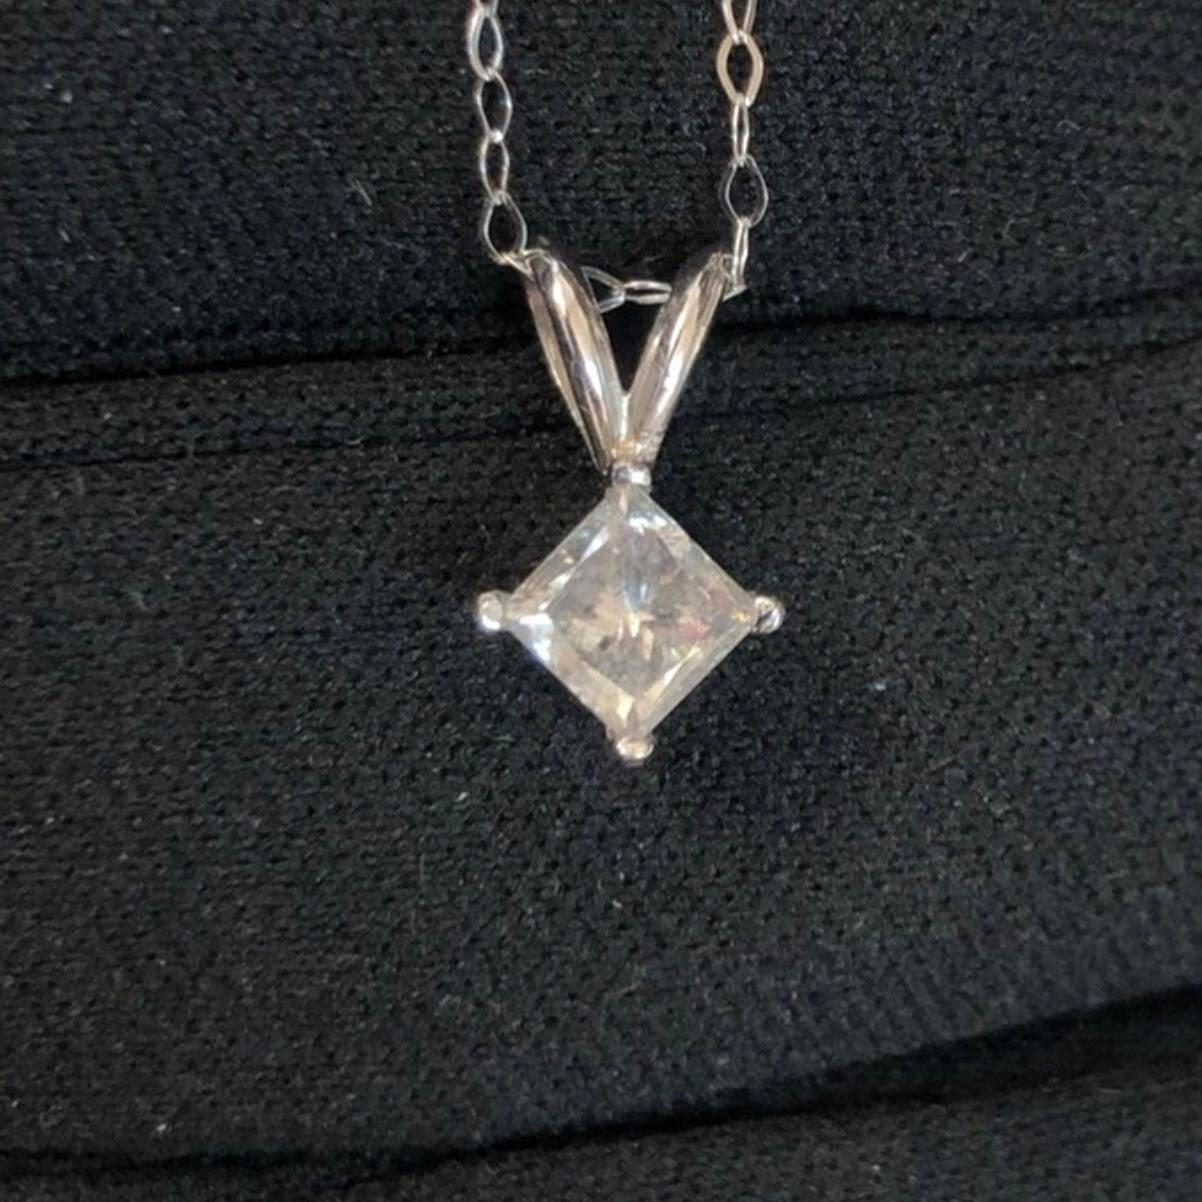 Elegant near 1 carat princess diamond pendant in 14k white gold with necklace chain. A center princess cut diamond weighing nearly 1 carat (natural earth-mined diamond) is set in a 4-prong basket.

Diamond solitaire pendant in 14k white gold setting